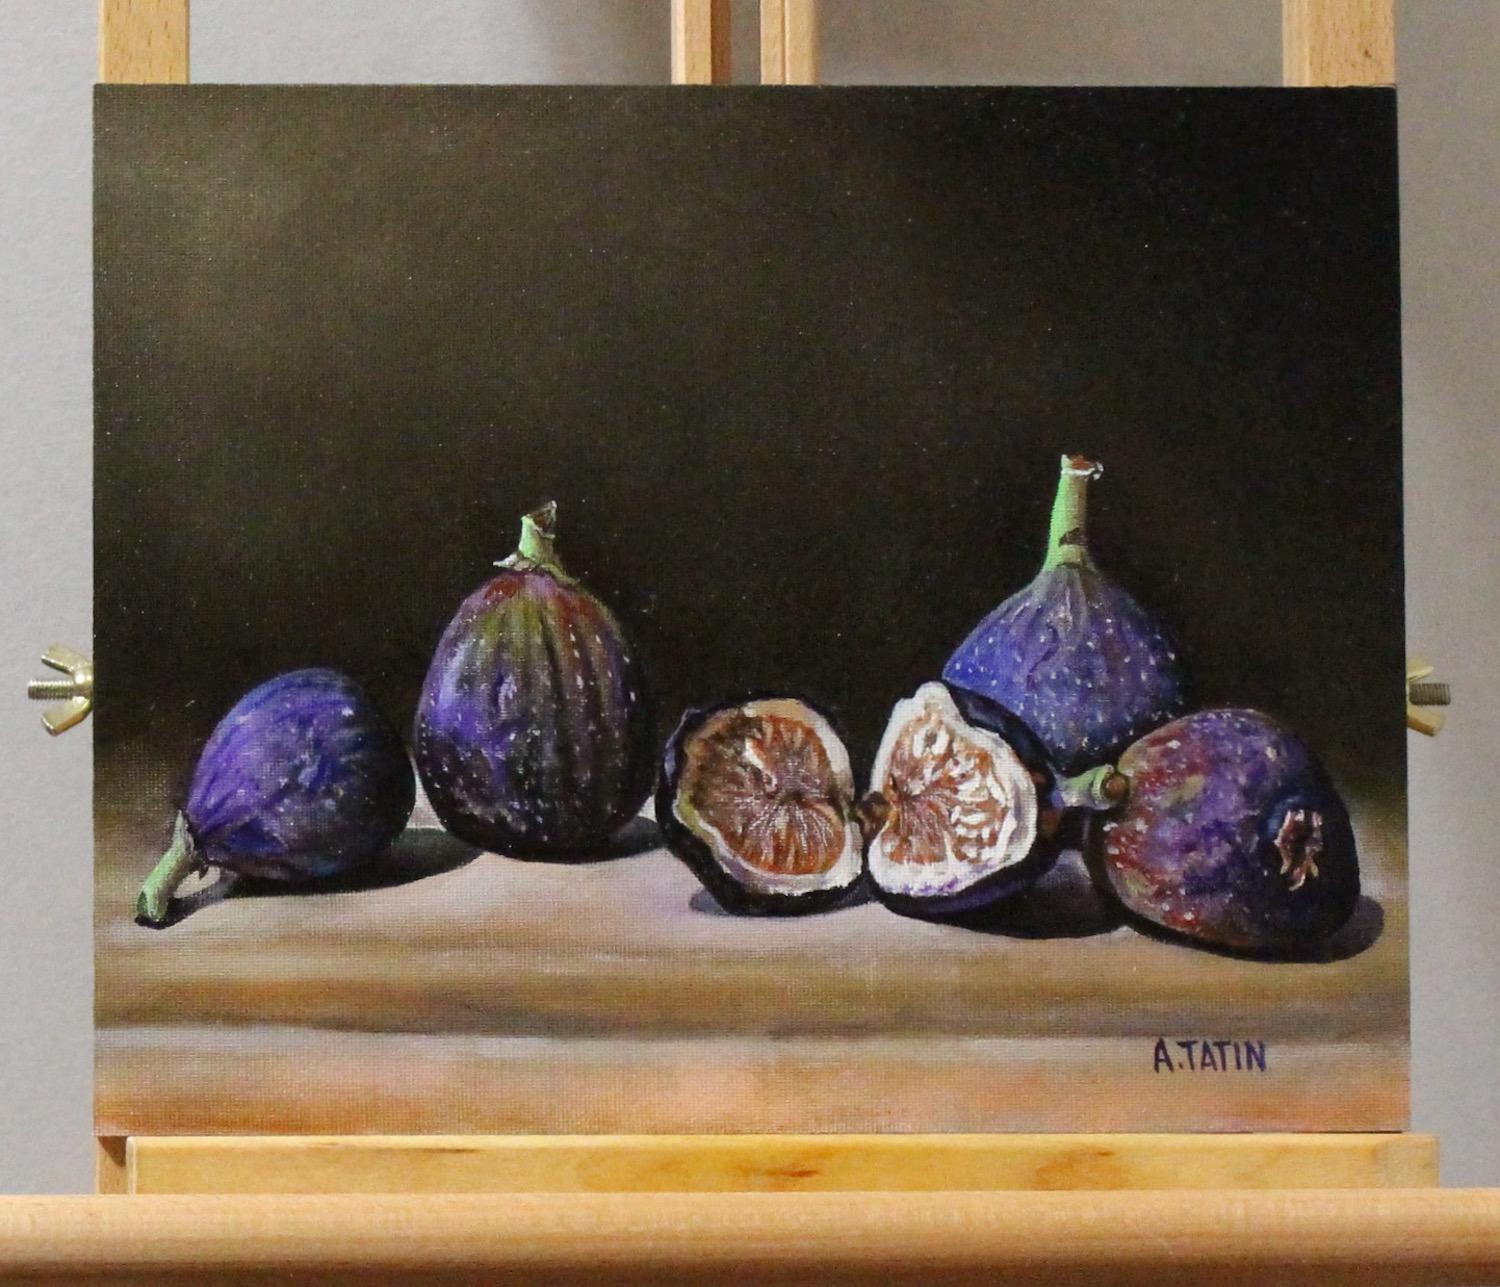 <p>Artist Comments<br>This oil painting features five California figs on a wooden table. The composition captures a moment of simplicity, with the opened fig adding an element of intrigue. The dark background enhances the color of the fruits and